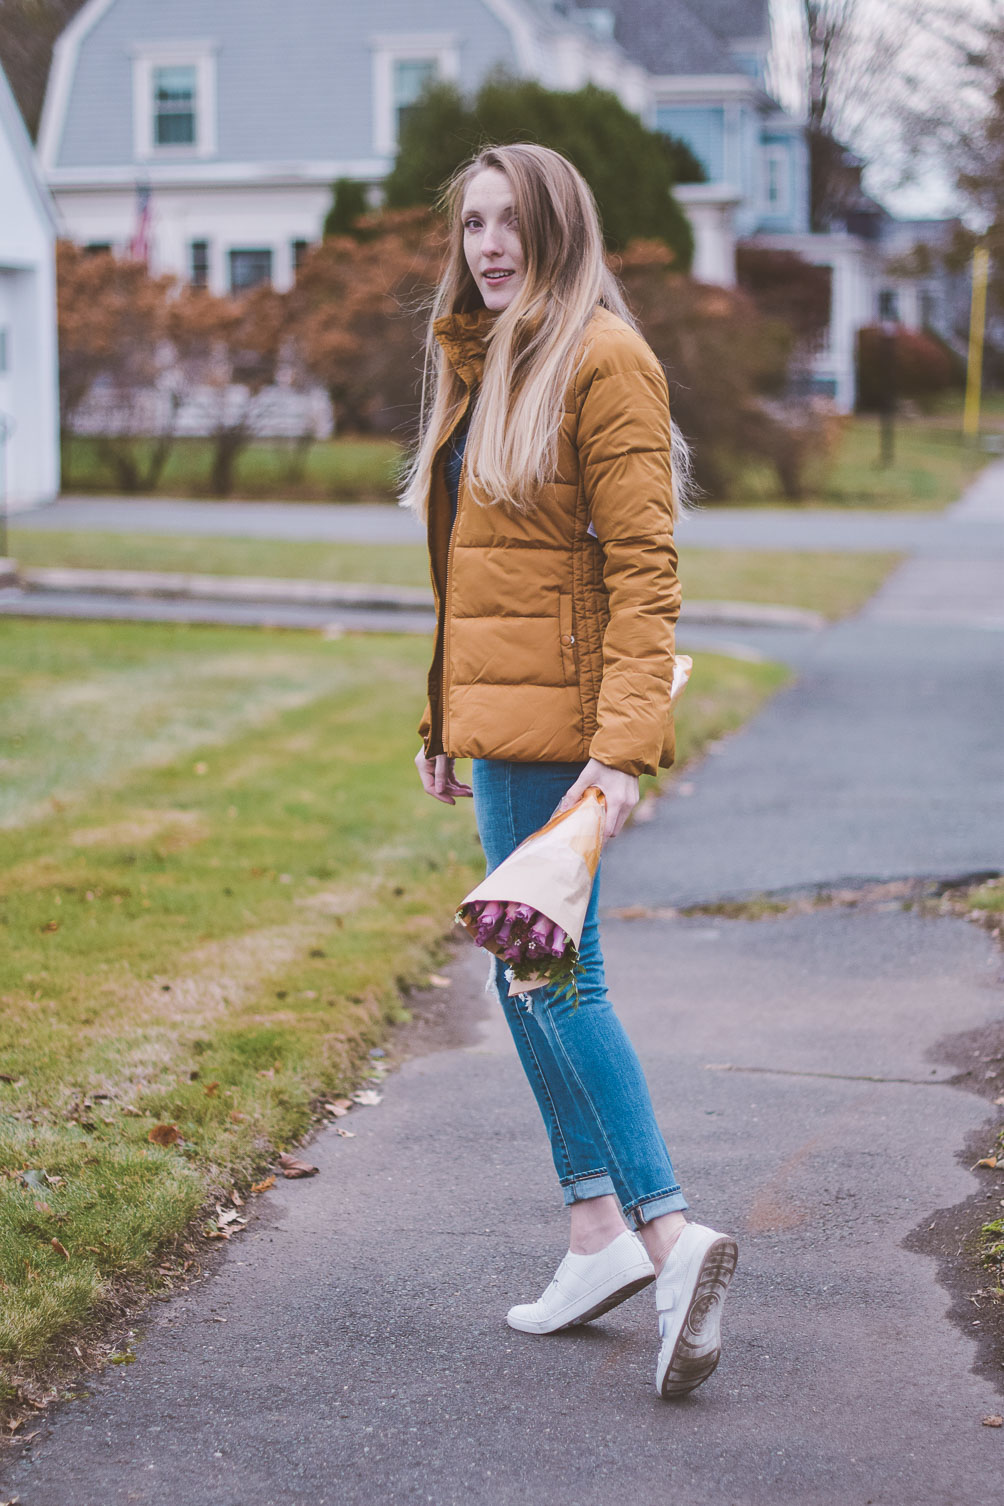 styling an easy winter outfit and tips on how to wear a puffer jacket with a turtleneck and Levi's